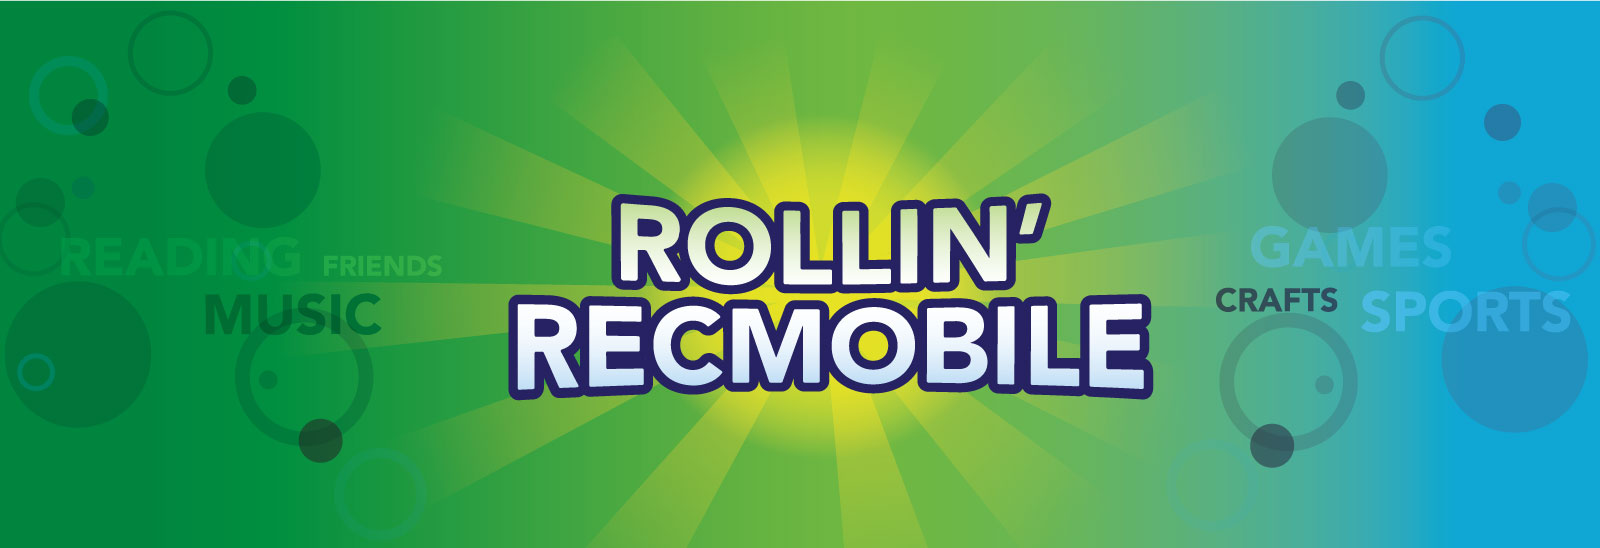 Recmobile-Banner